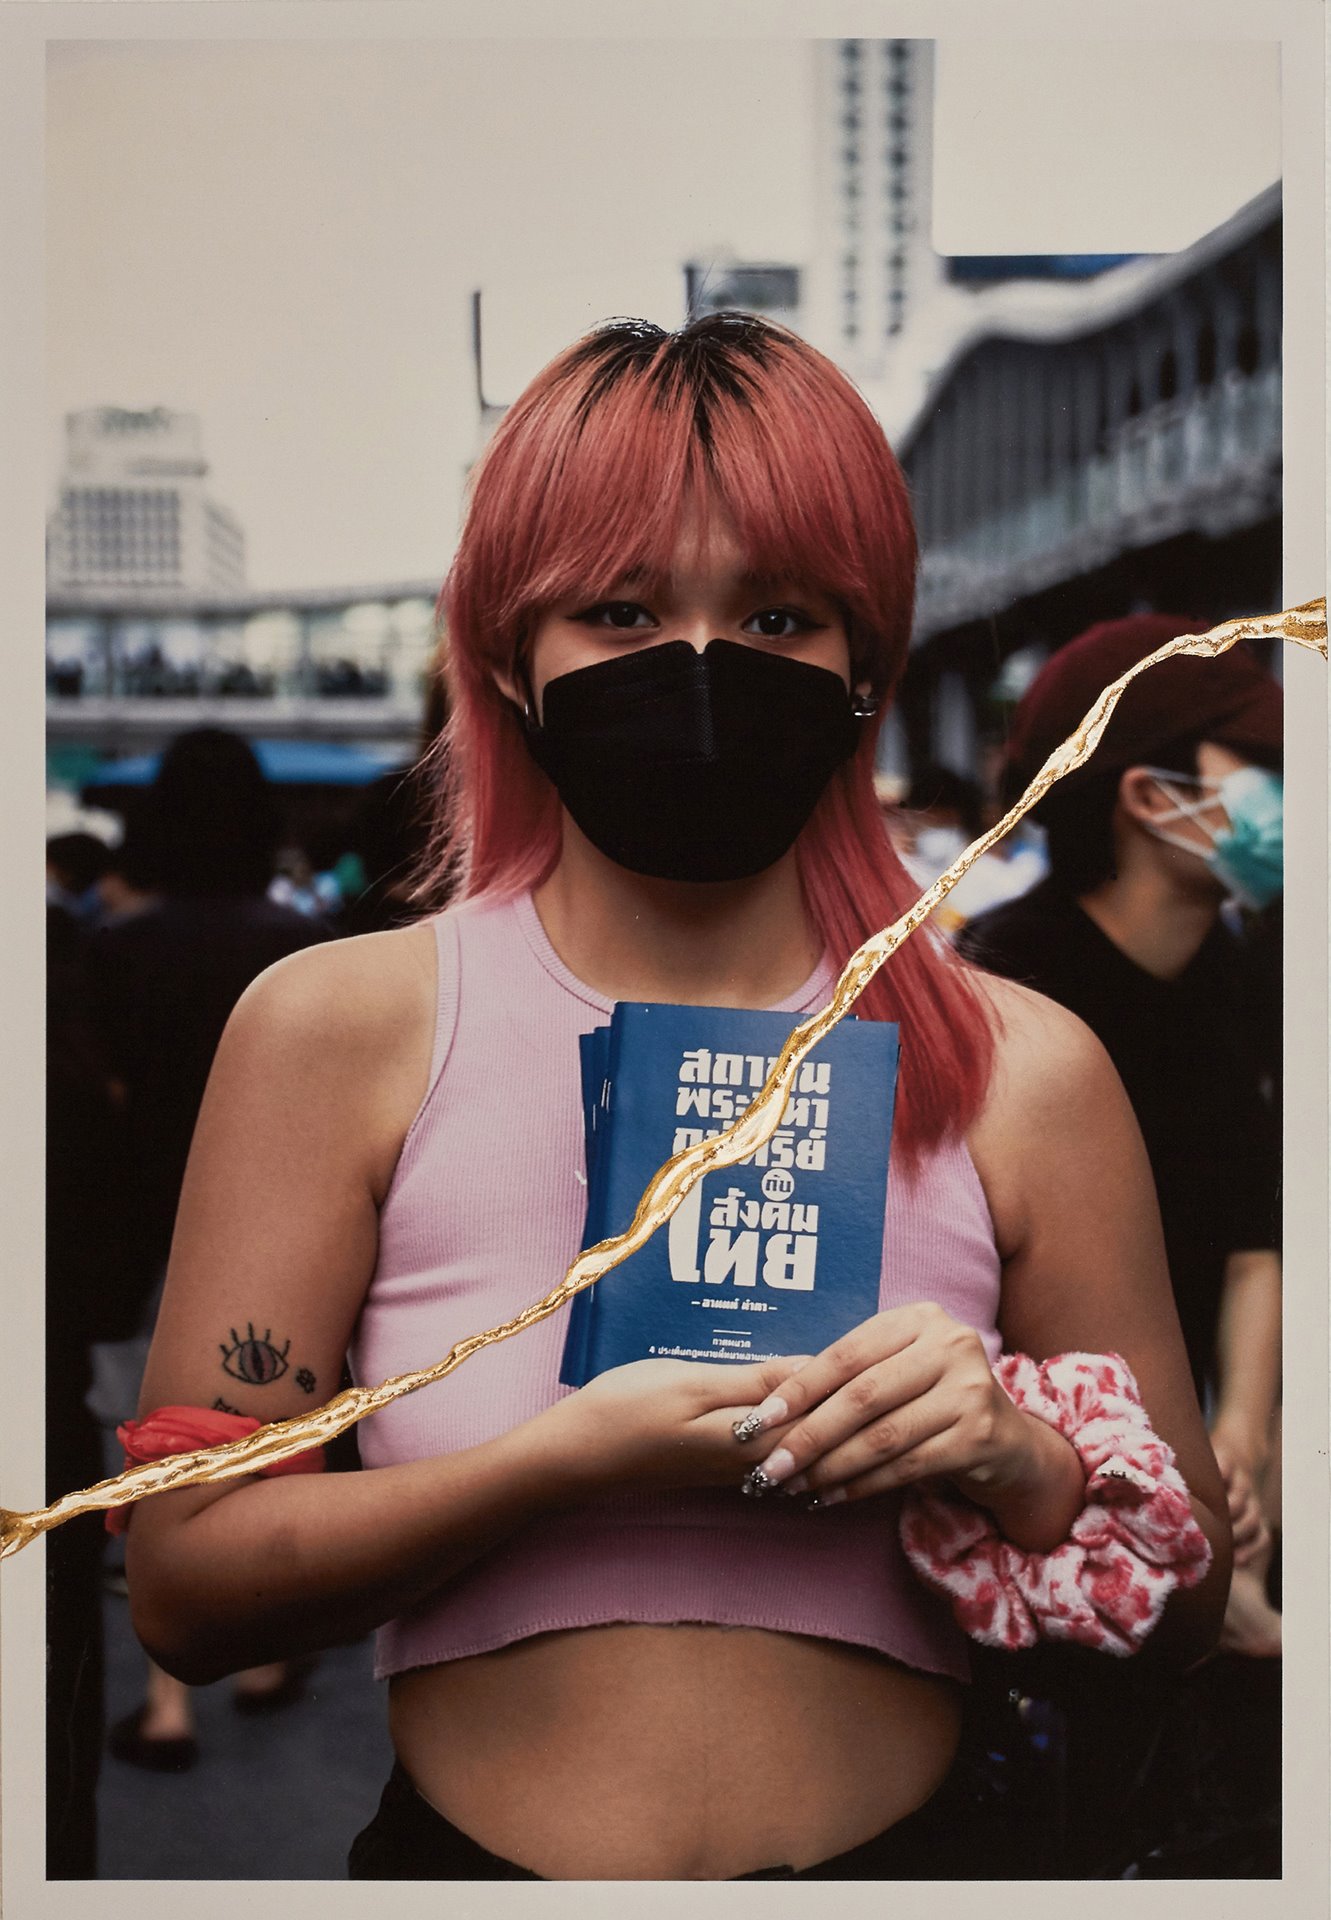 <p>A third-year student at Thammasat University participates in a pro-democracy protest in Bangkok, Thailand. They say: &ldquo;The younger generation is questioning the present and looking into the past to try and understand what happened. They want to understand what problems, limitations, and structural problems still cause issues today.&rdquo;</p>
